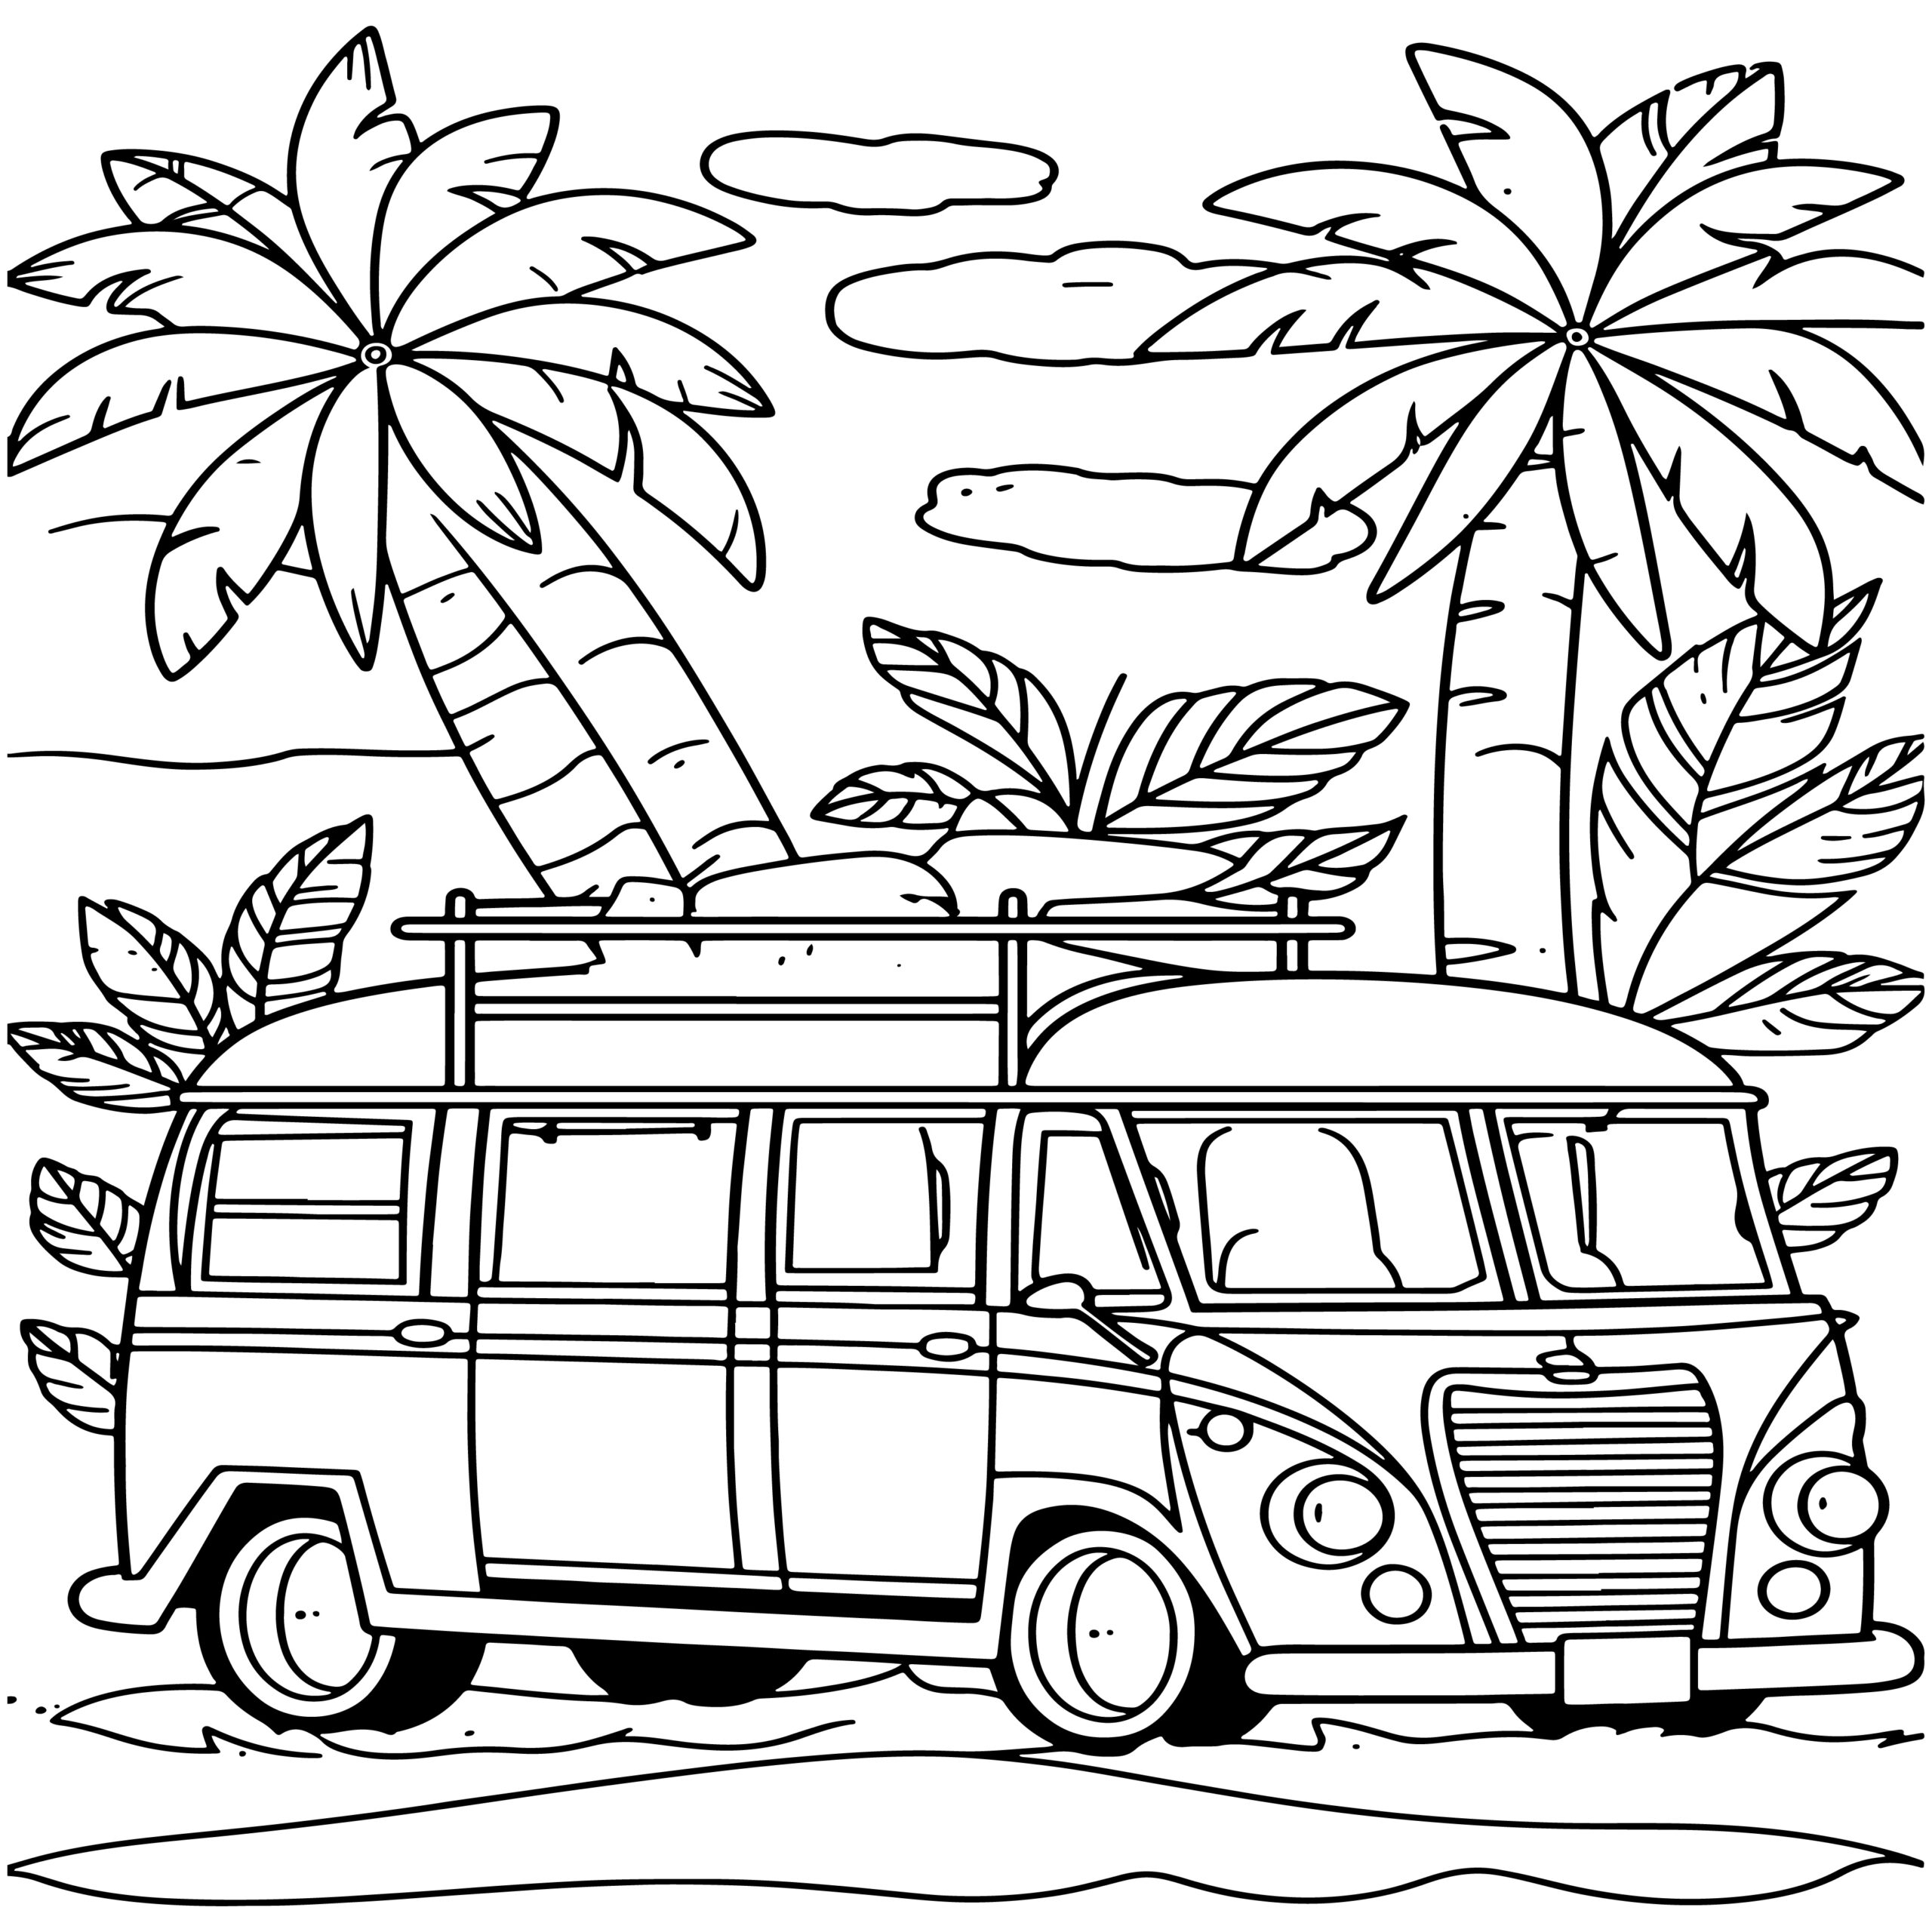 Rv road trip coloring book scenic landscapes for stress relief and relaxation made by teachers